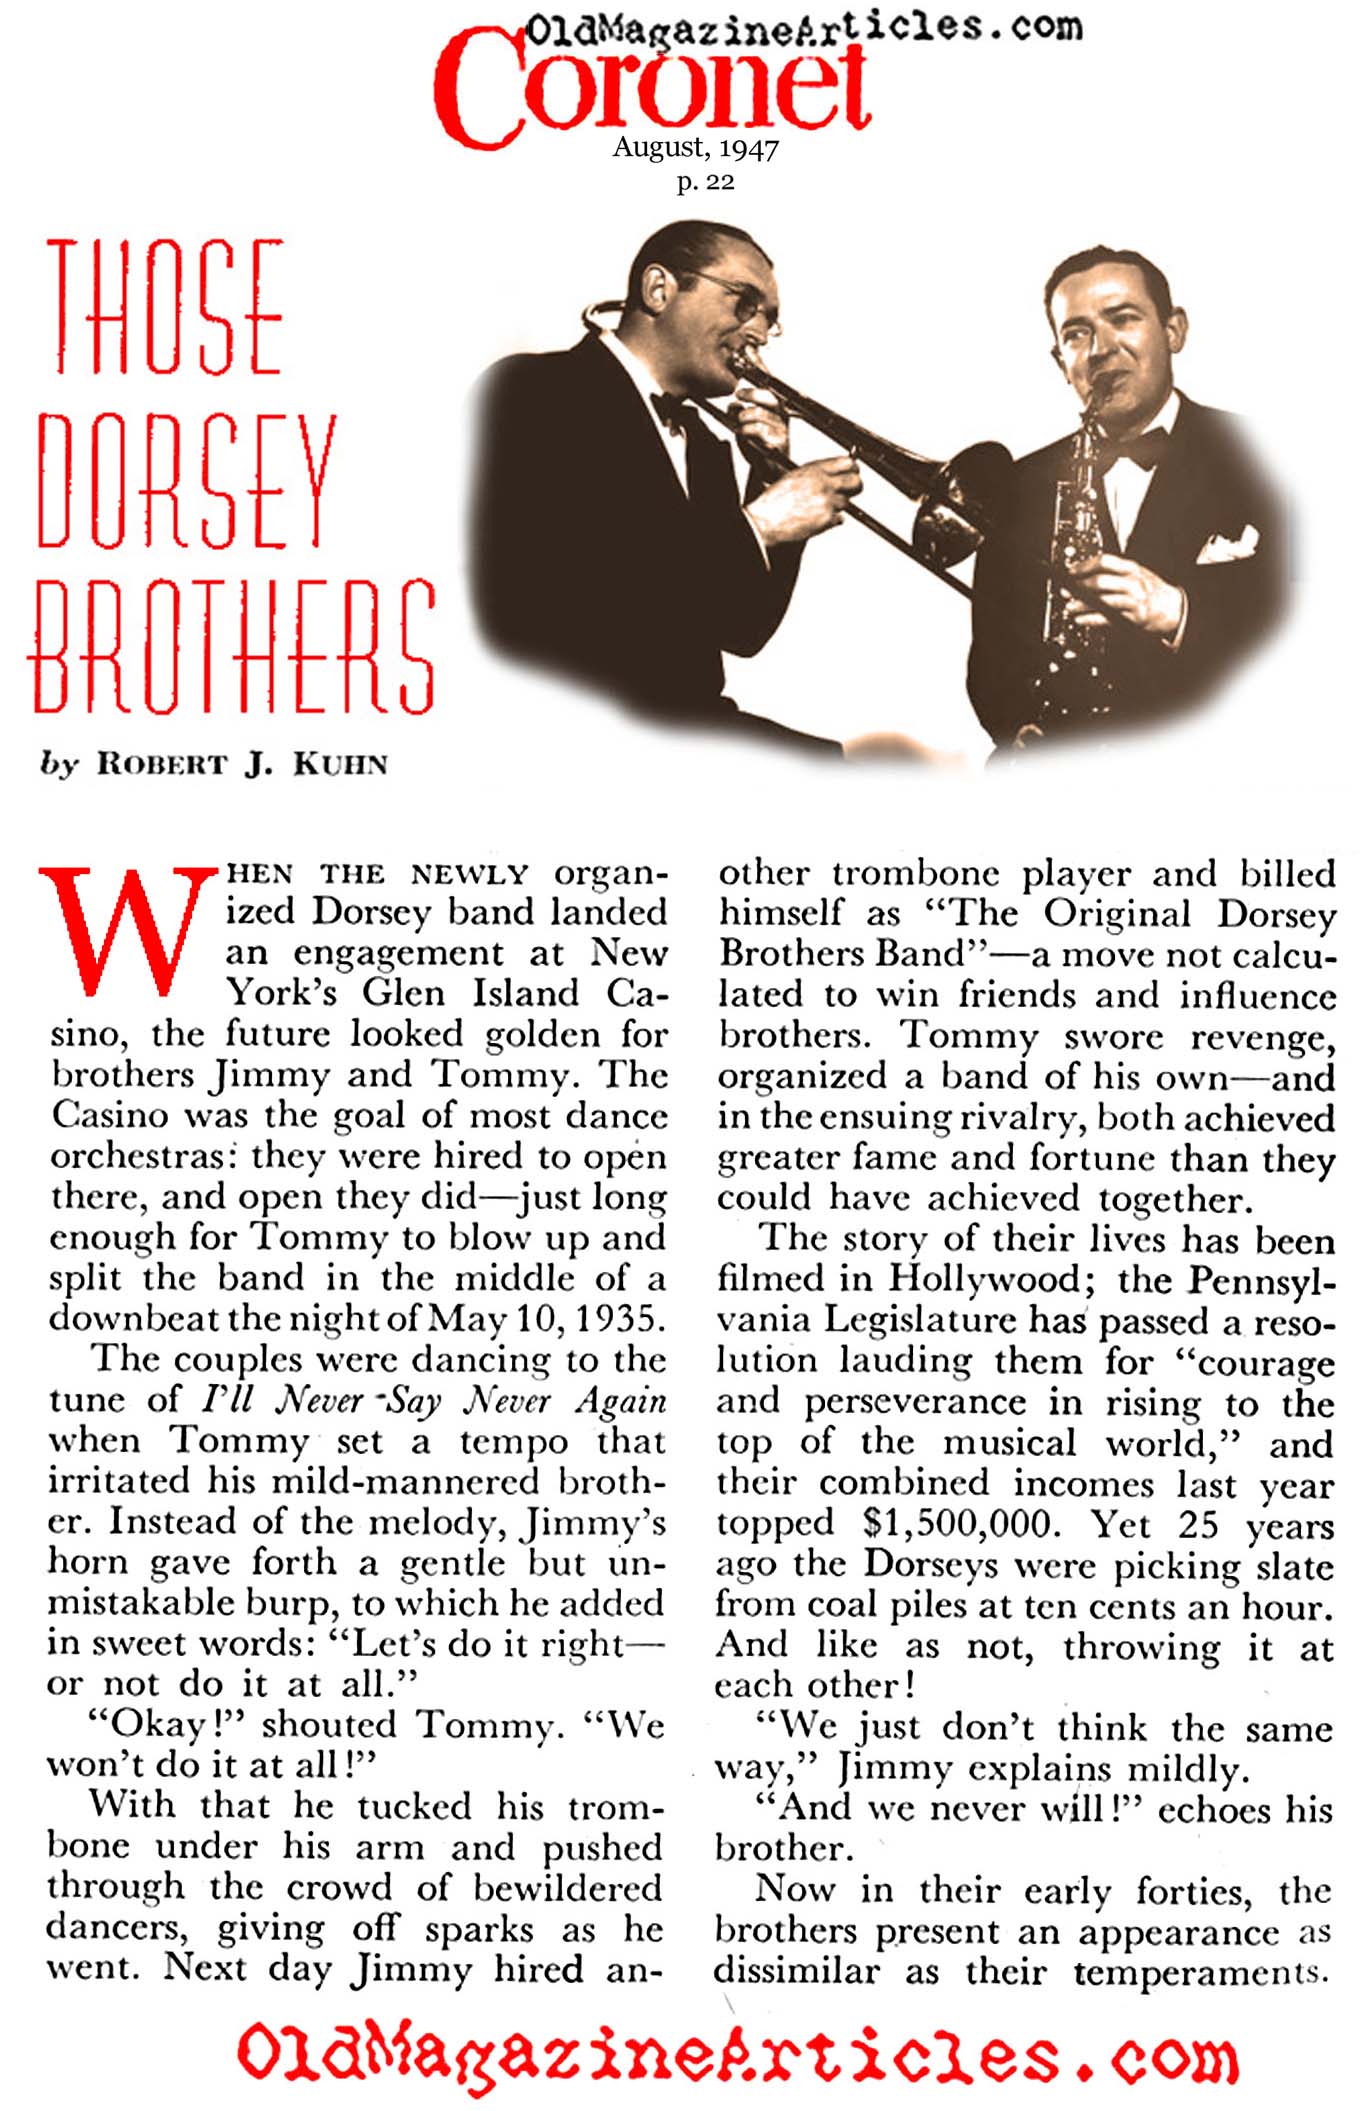 The Feuding Dorsey Brothers (Coronet Magazine, 1947)